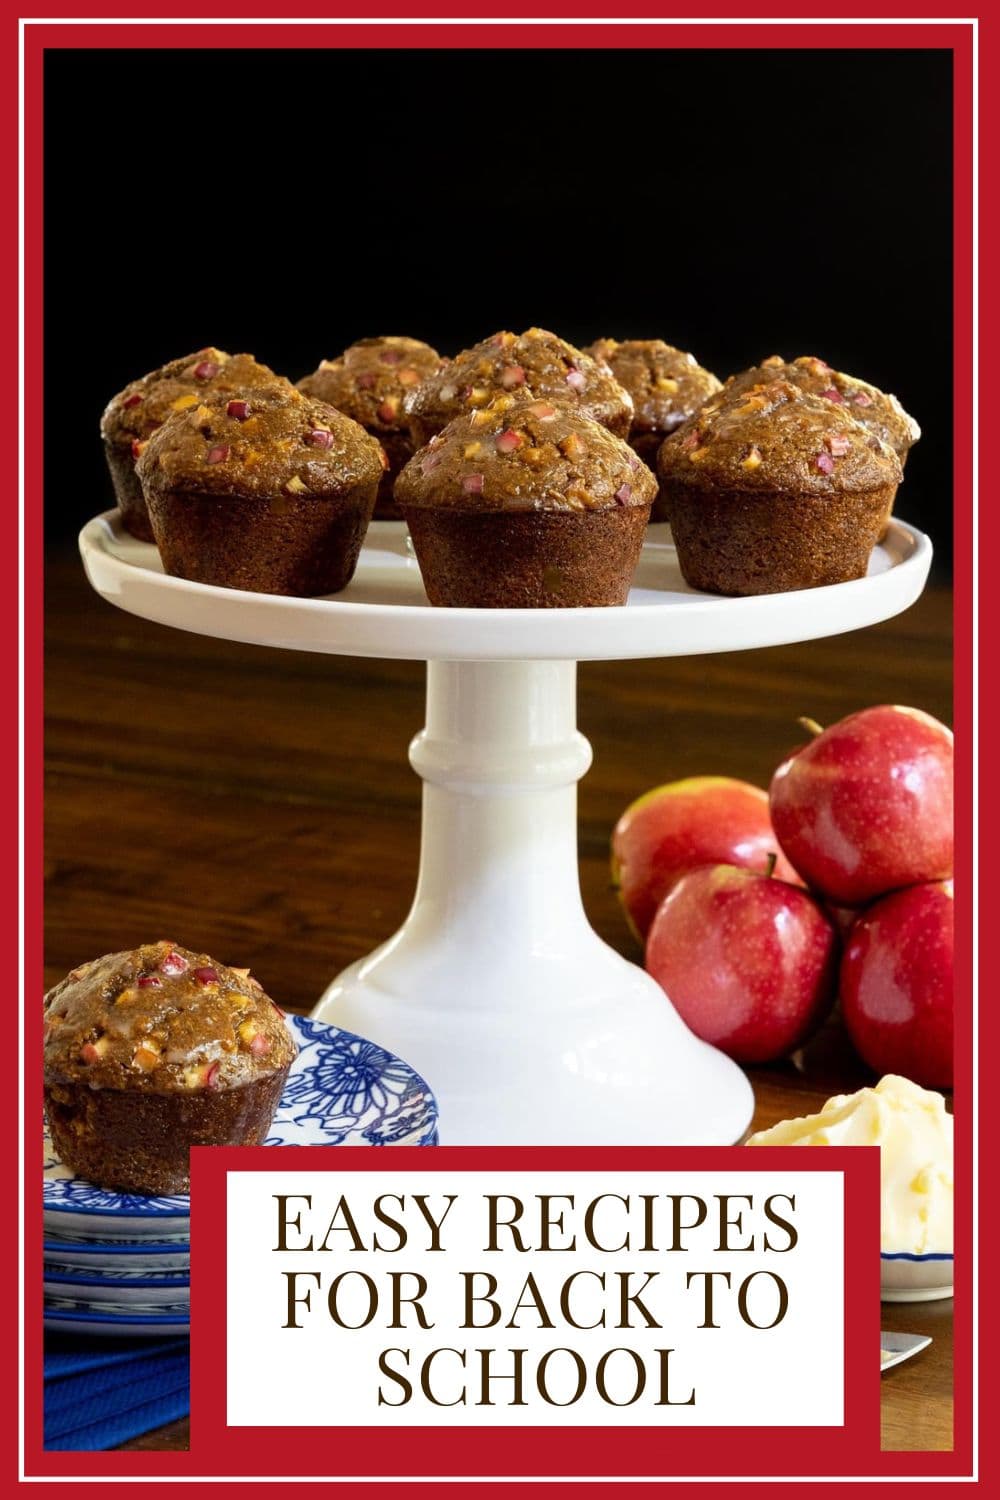 School Days... Easy Recipes for Back to School!